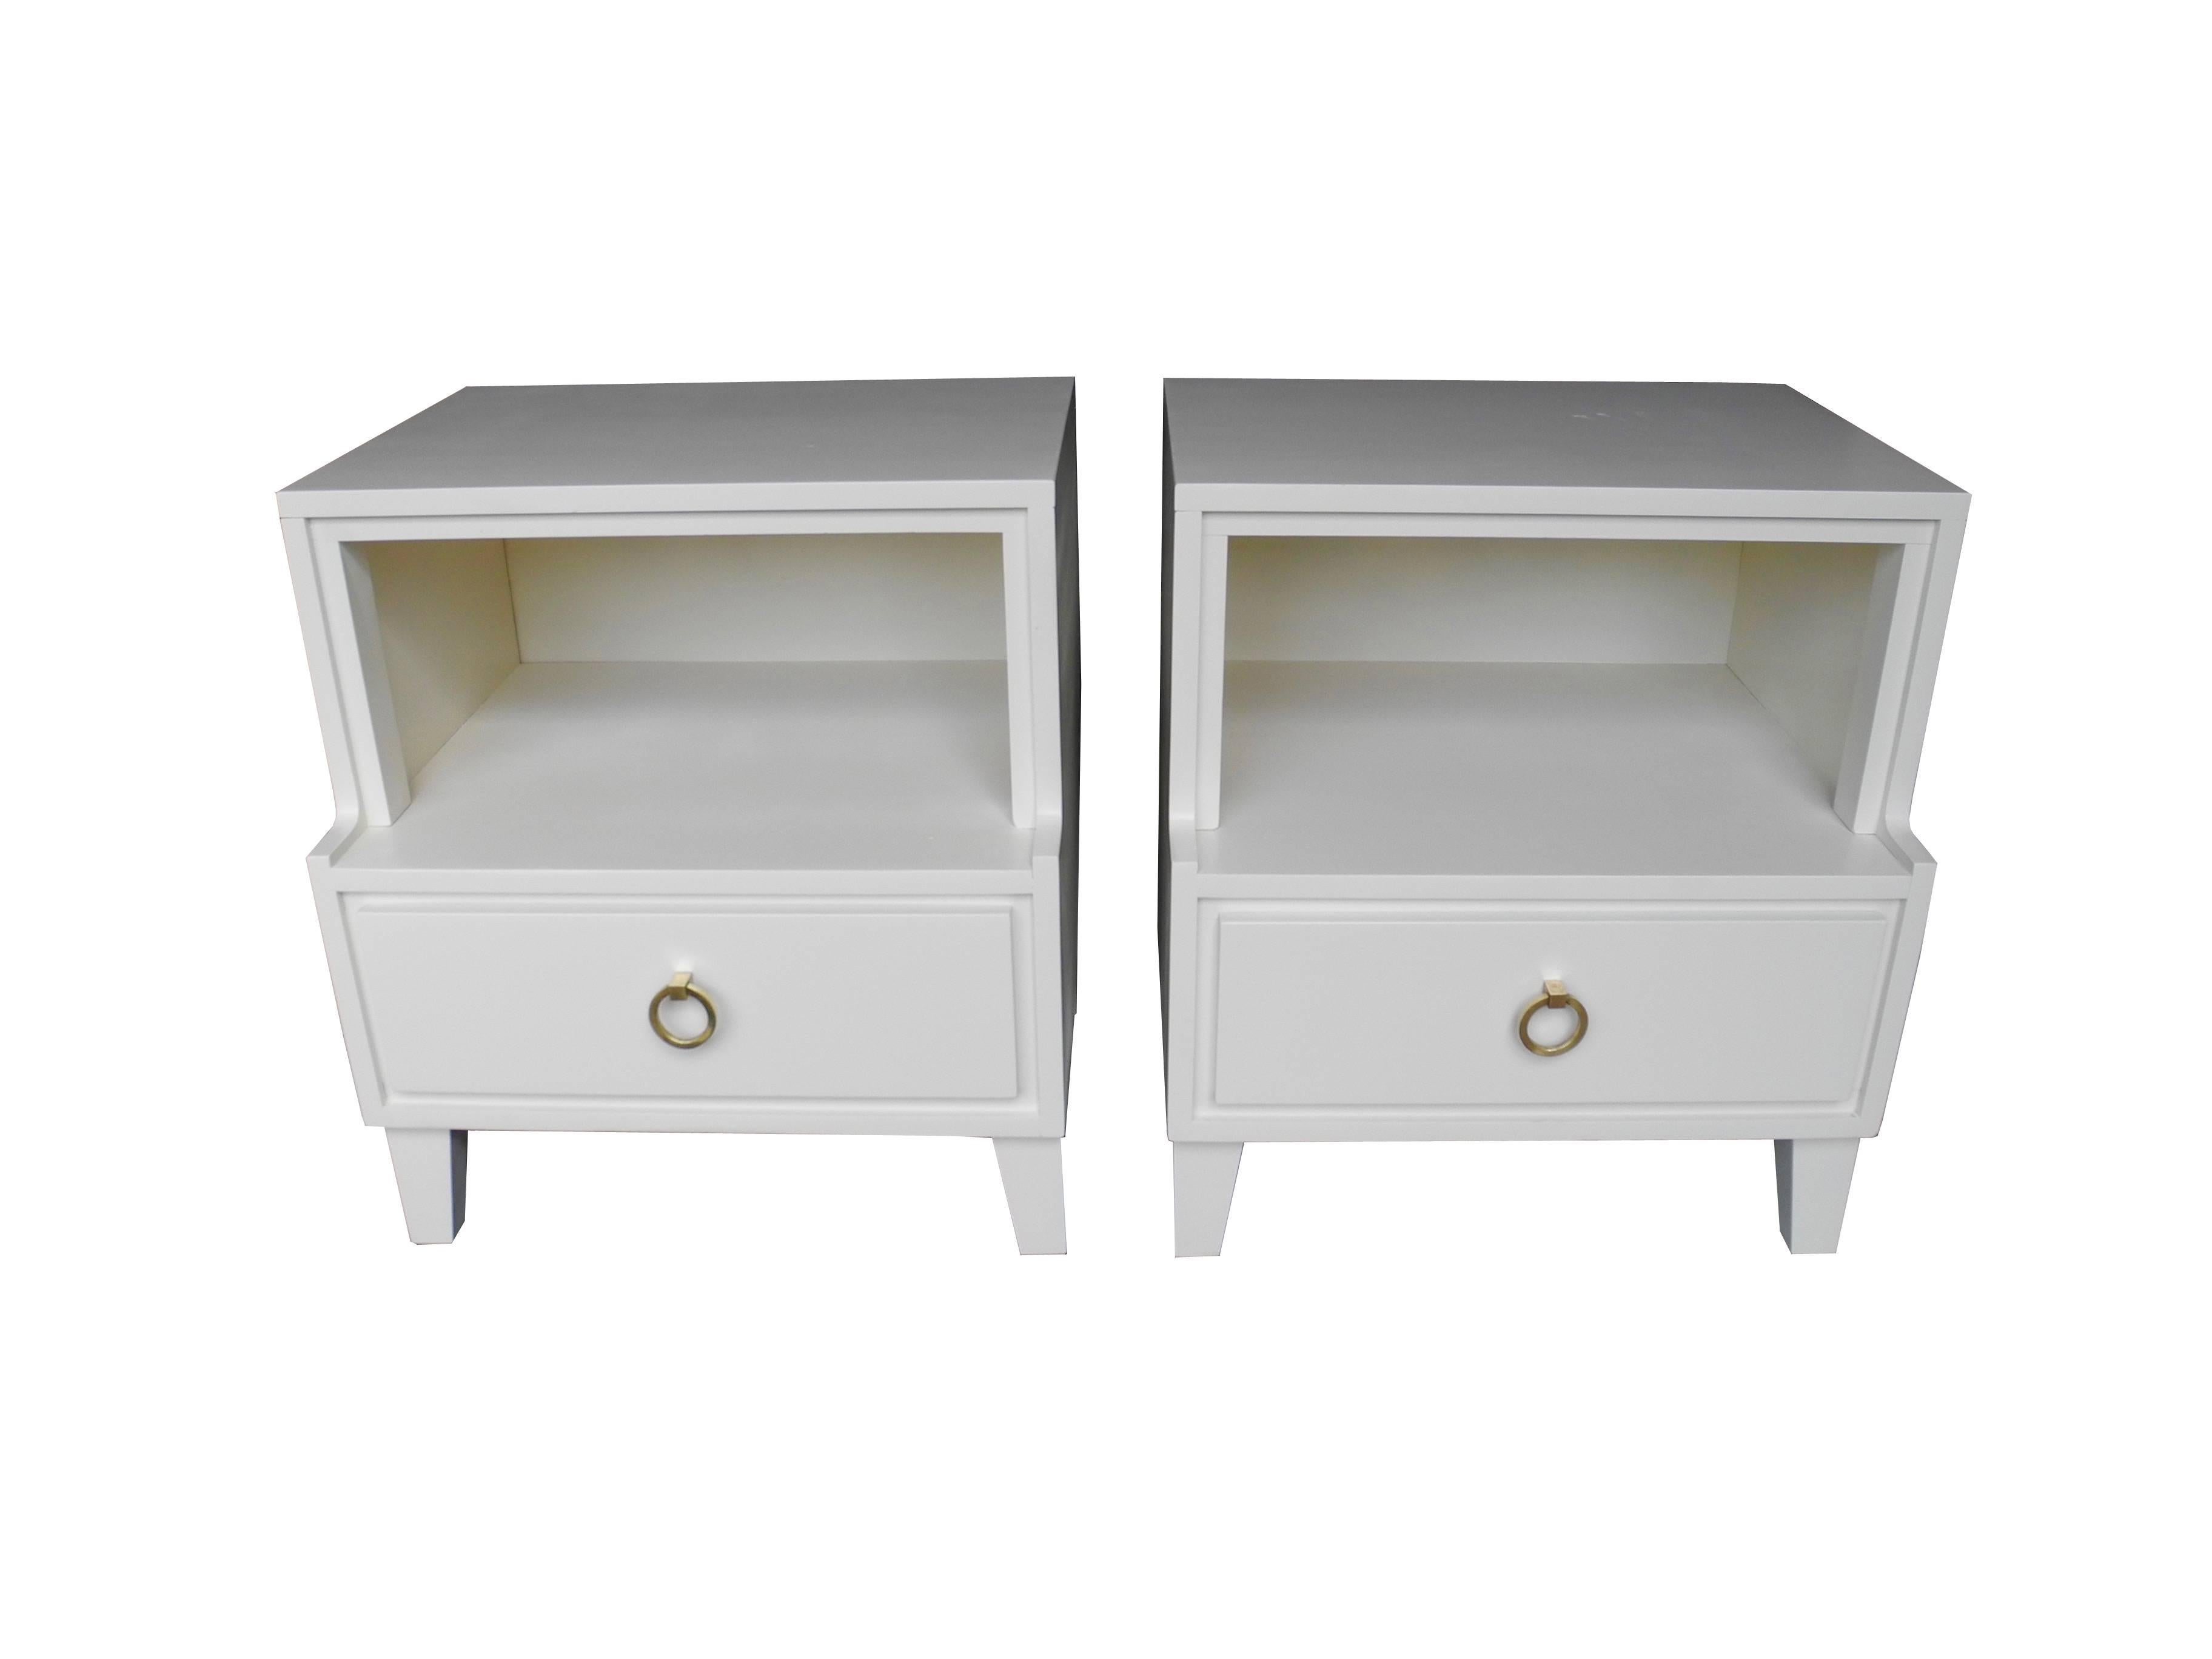 These nightstands or bedside tables are painted linen white or off-white. They have a cubby shelf and a drawer with a solid brass pull. Modern lines, plenty of storage, vintage, by Conant Ball, 1950s. The tops are 15.5